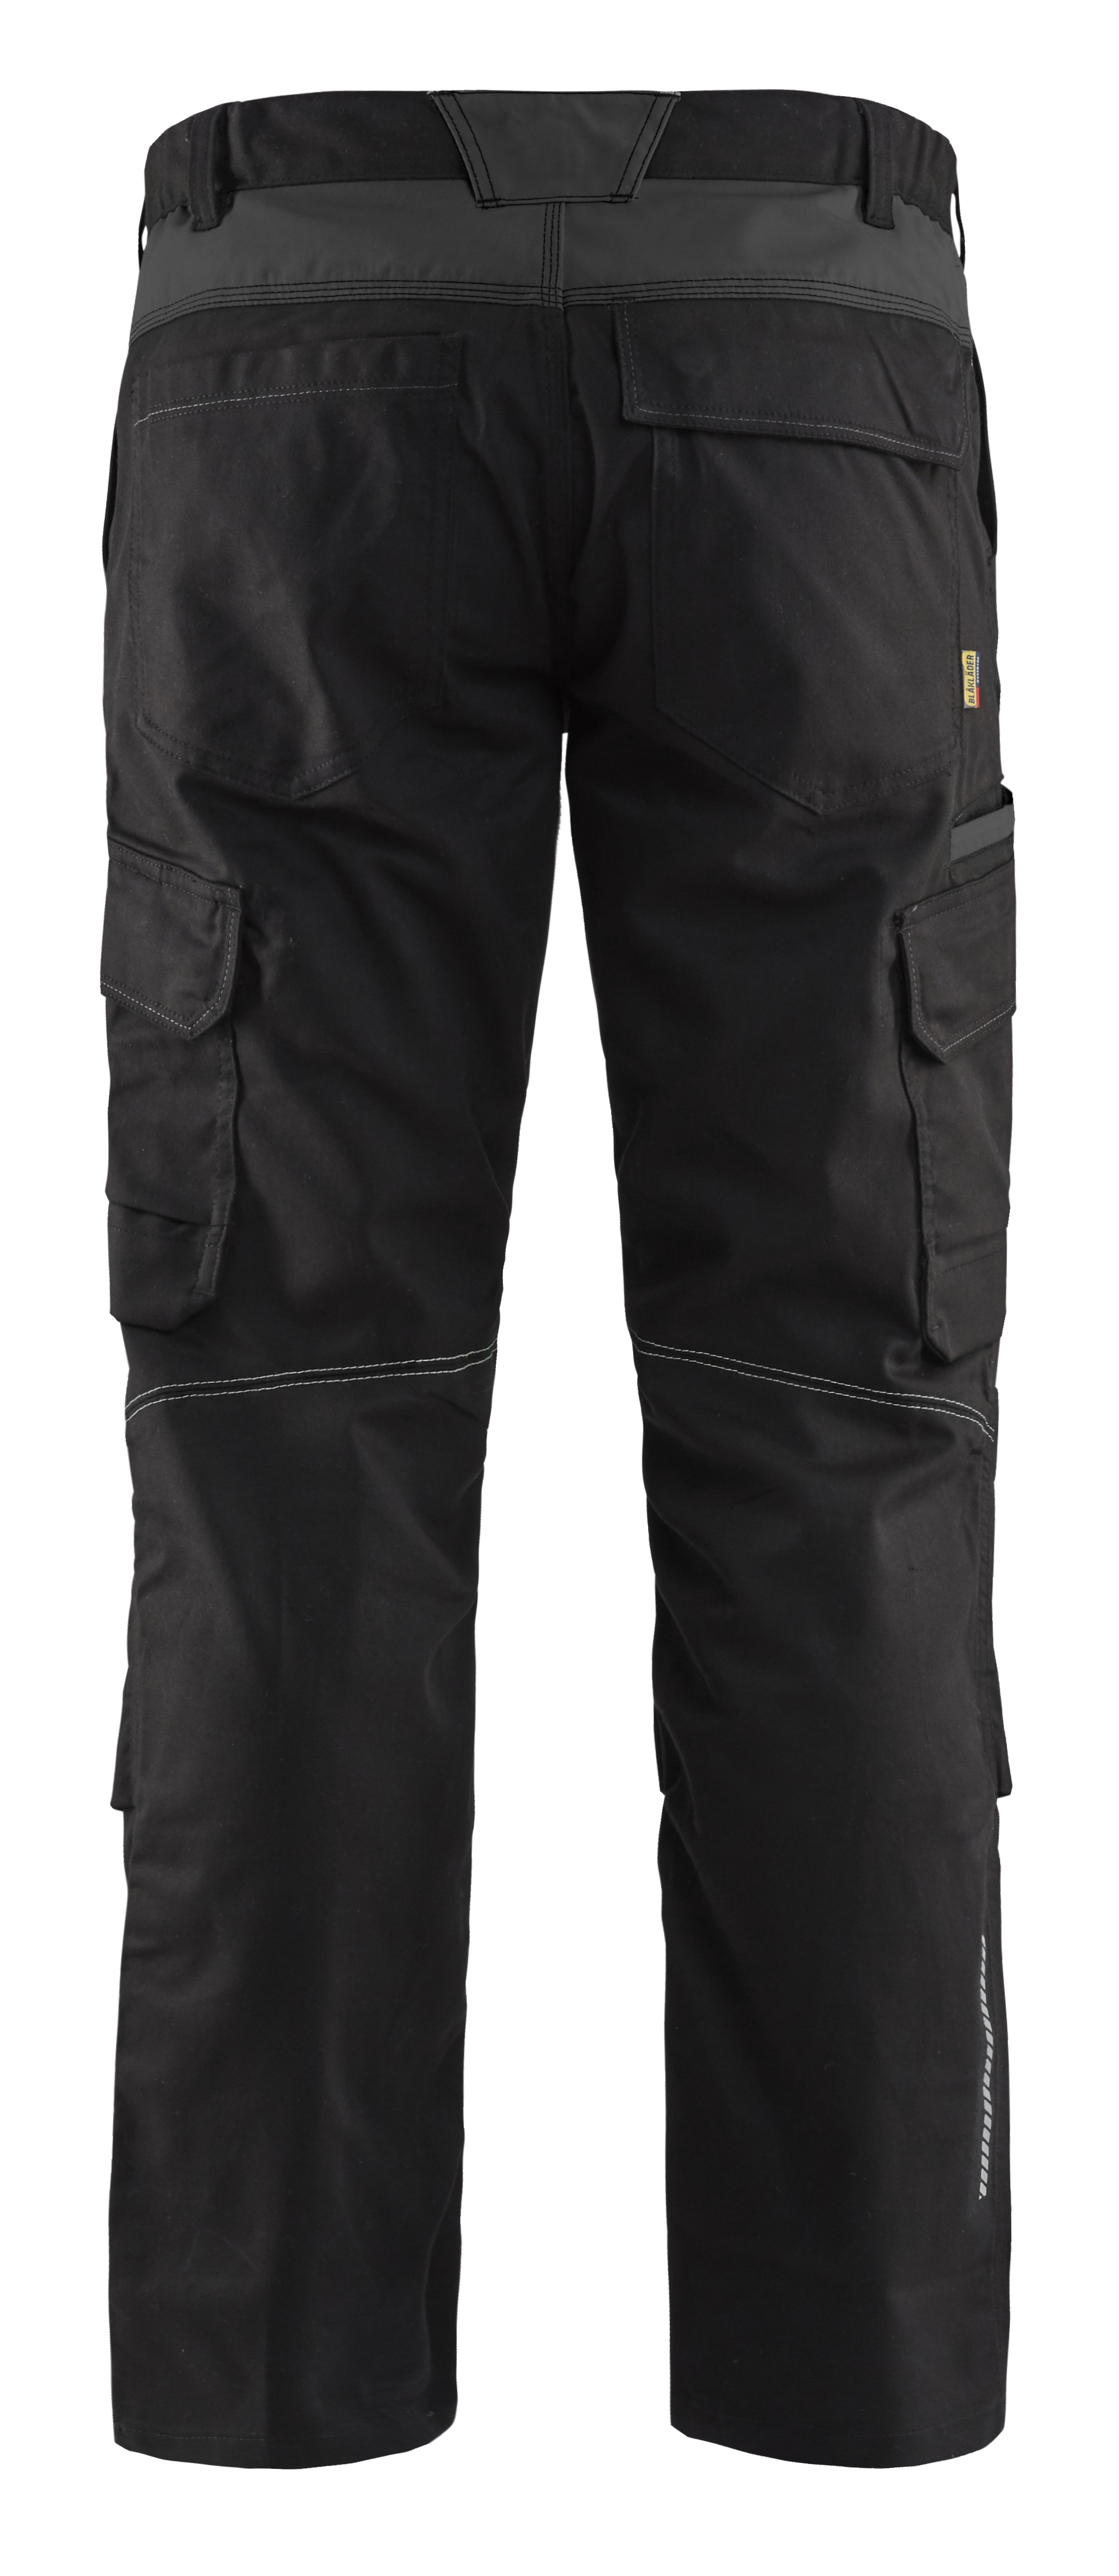 Industry trousers stretch with knee pad pockets (14481832) - Blaklader